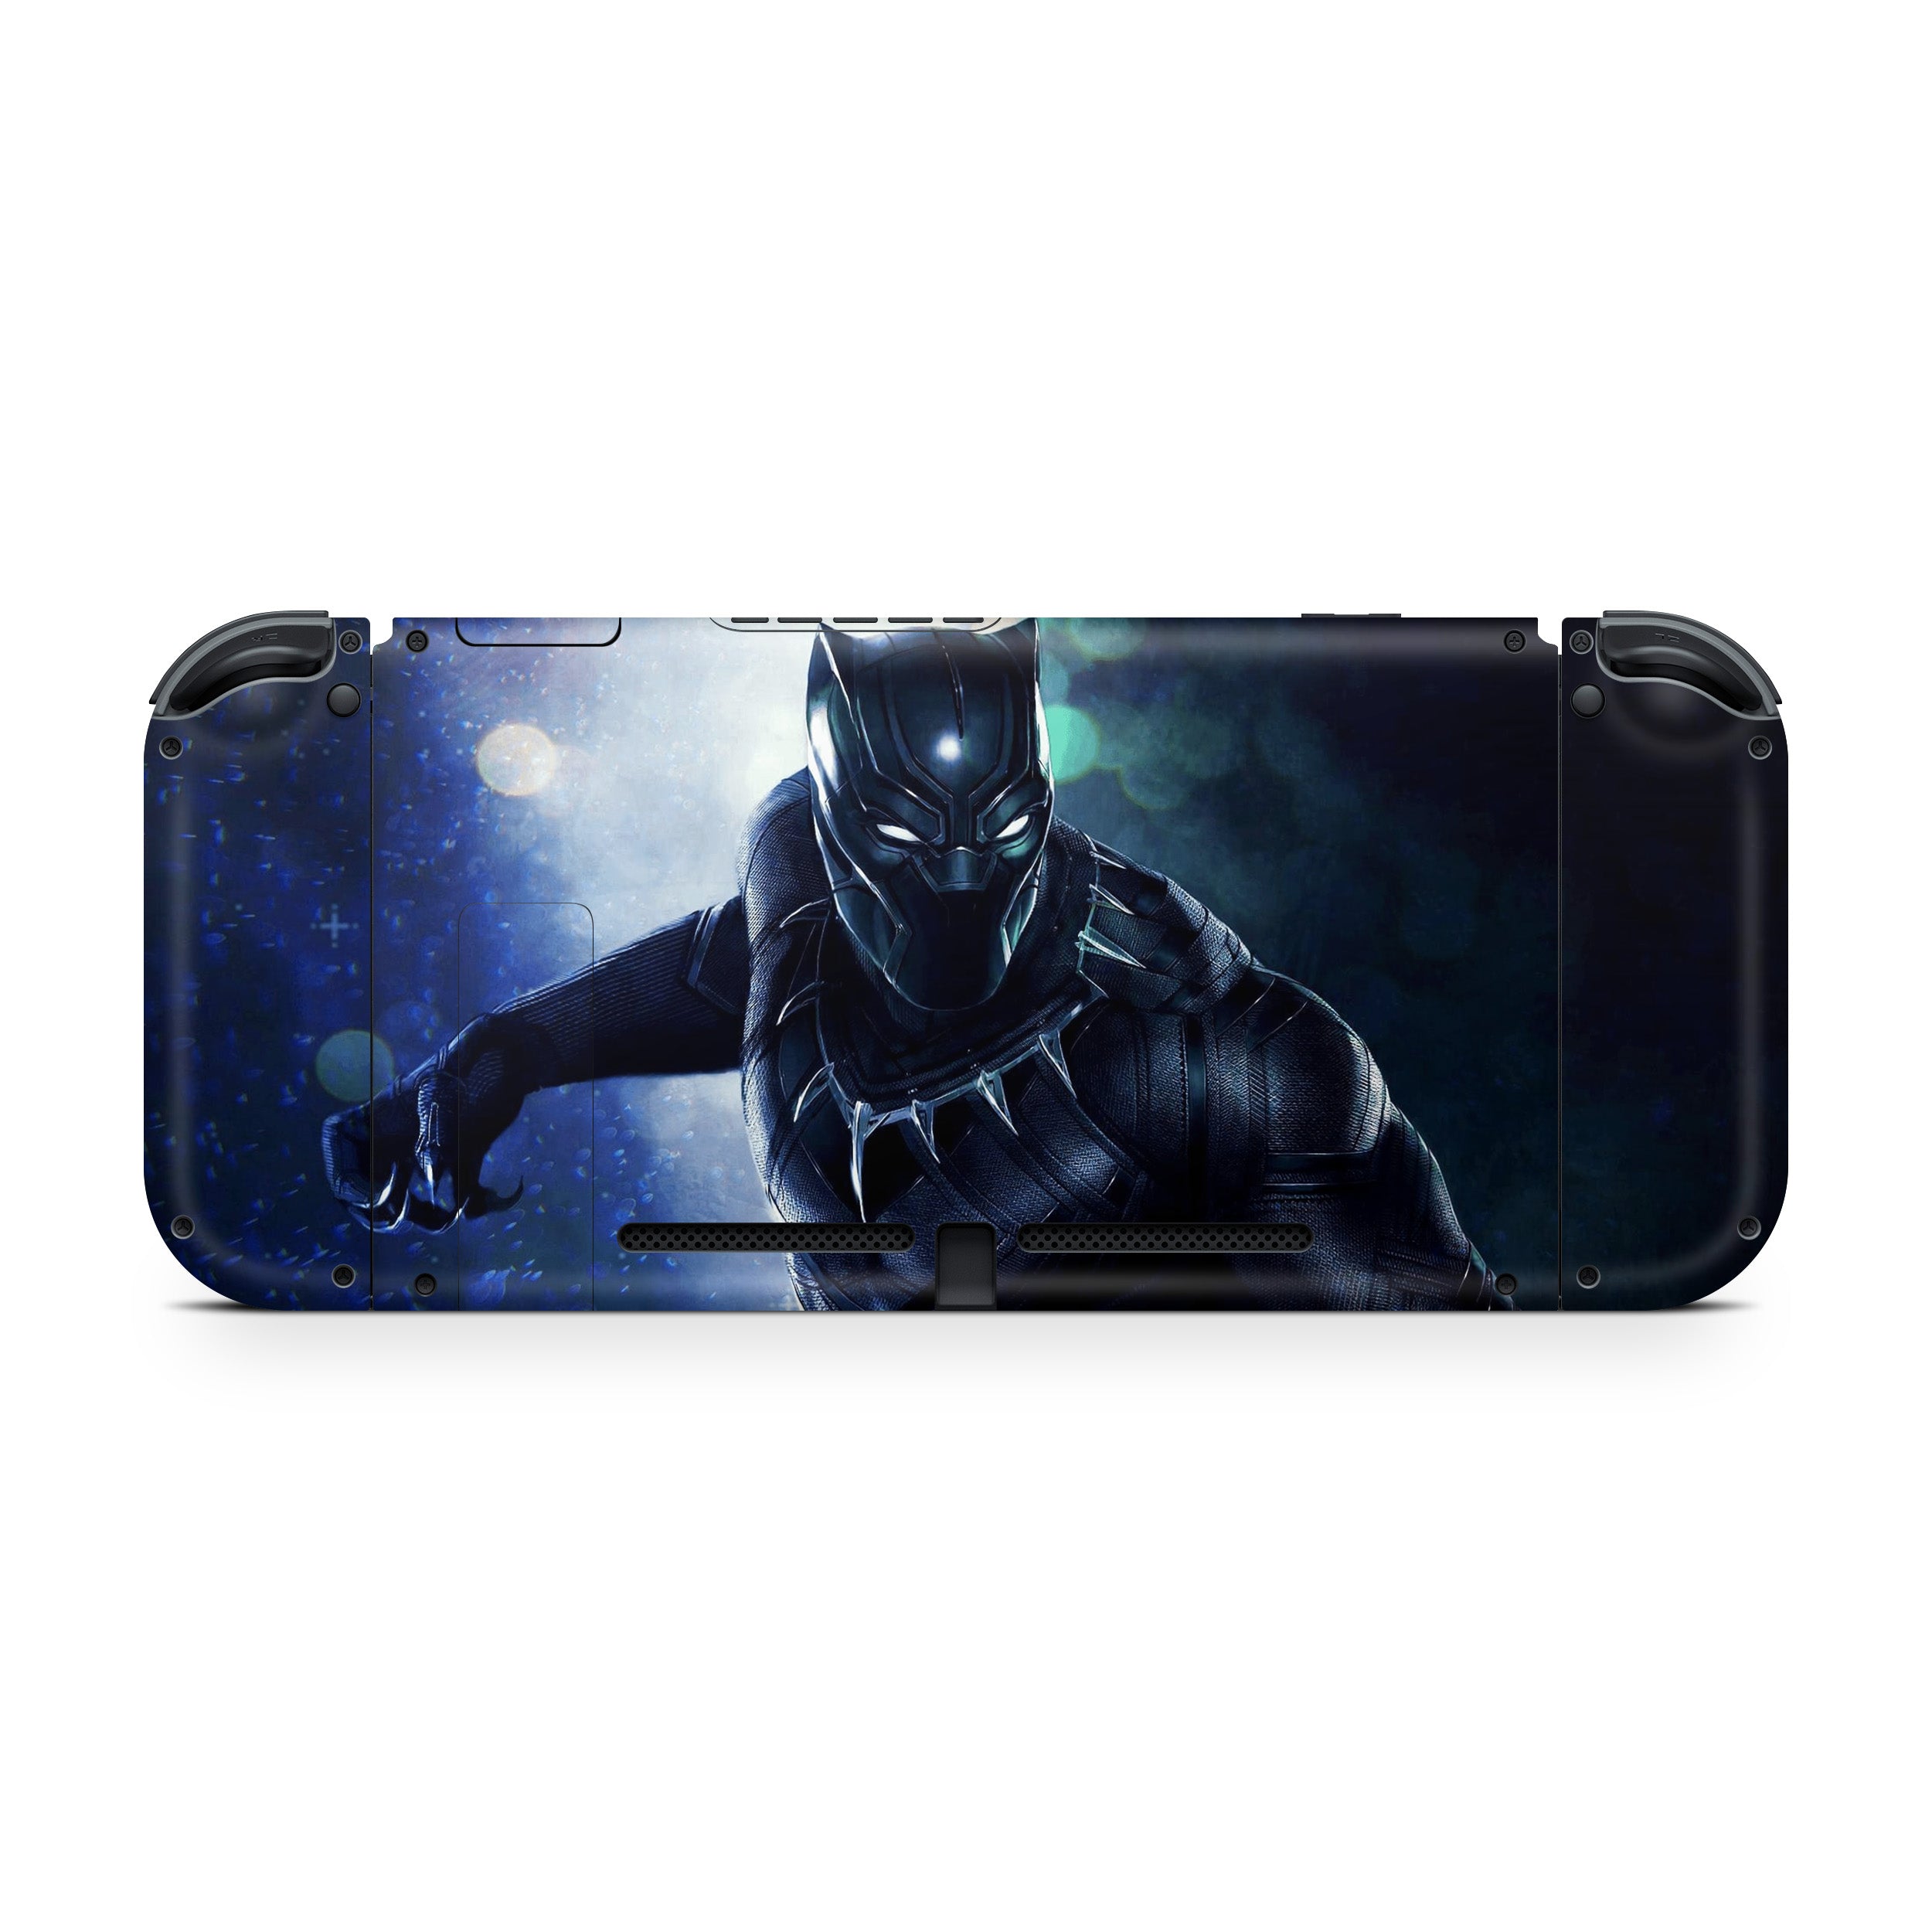 A video game skin featuring a Marvel Black Panther design for the Nintendo Switch.